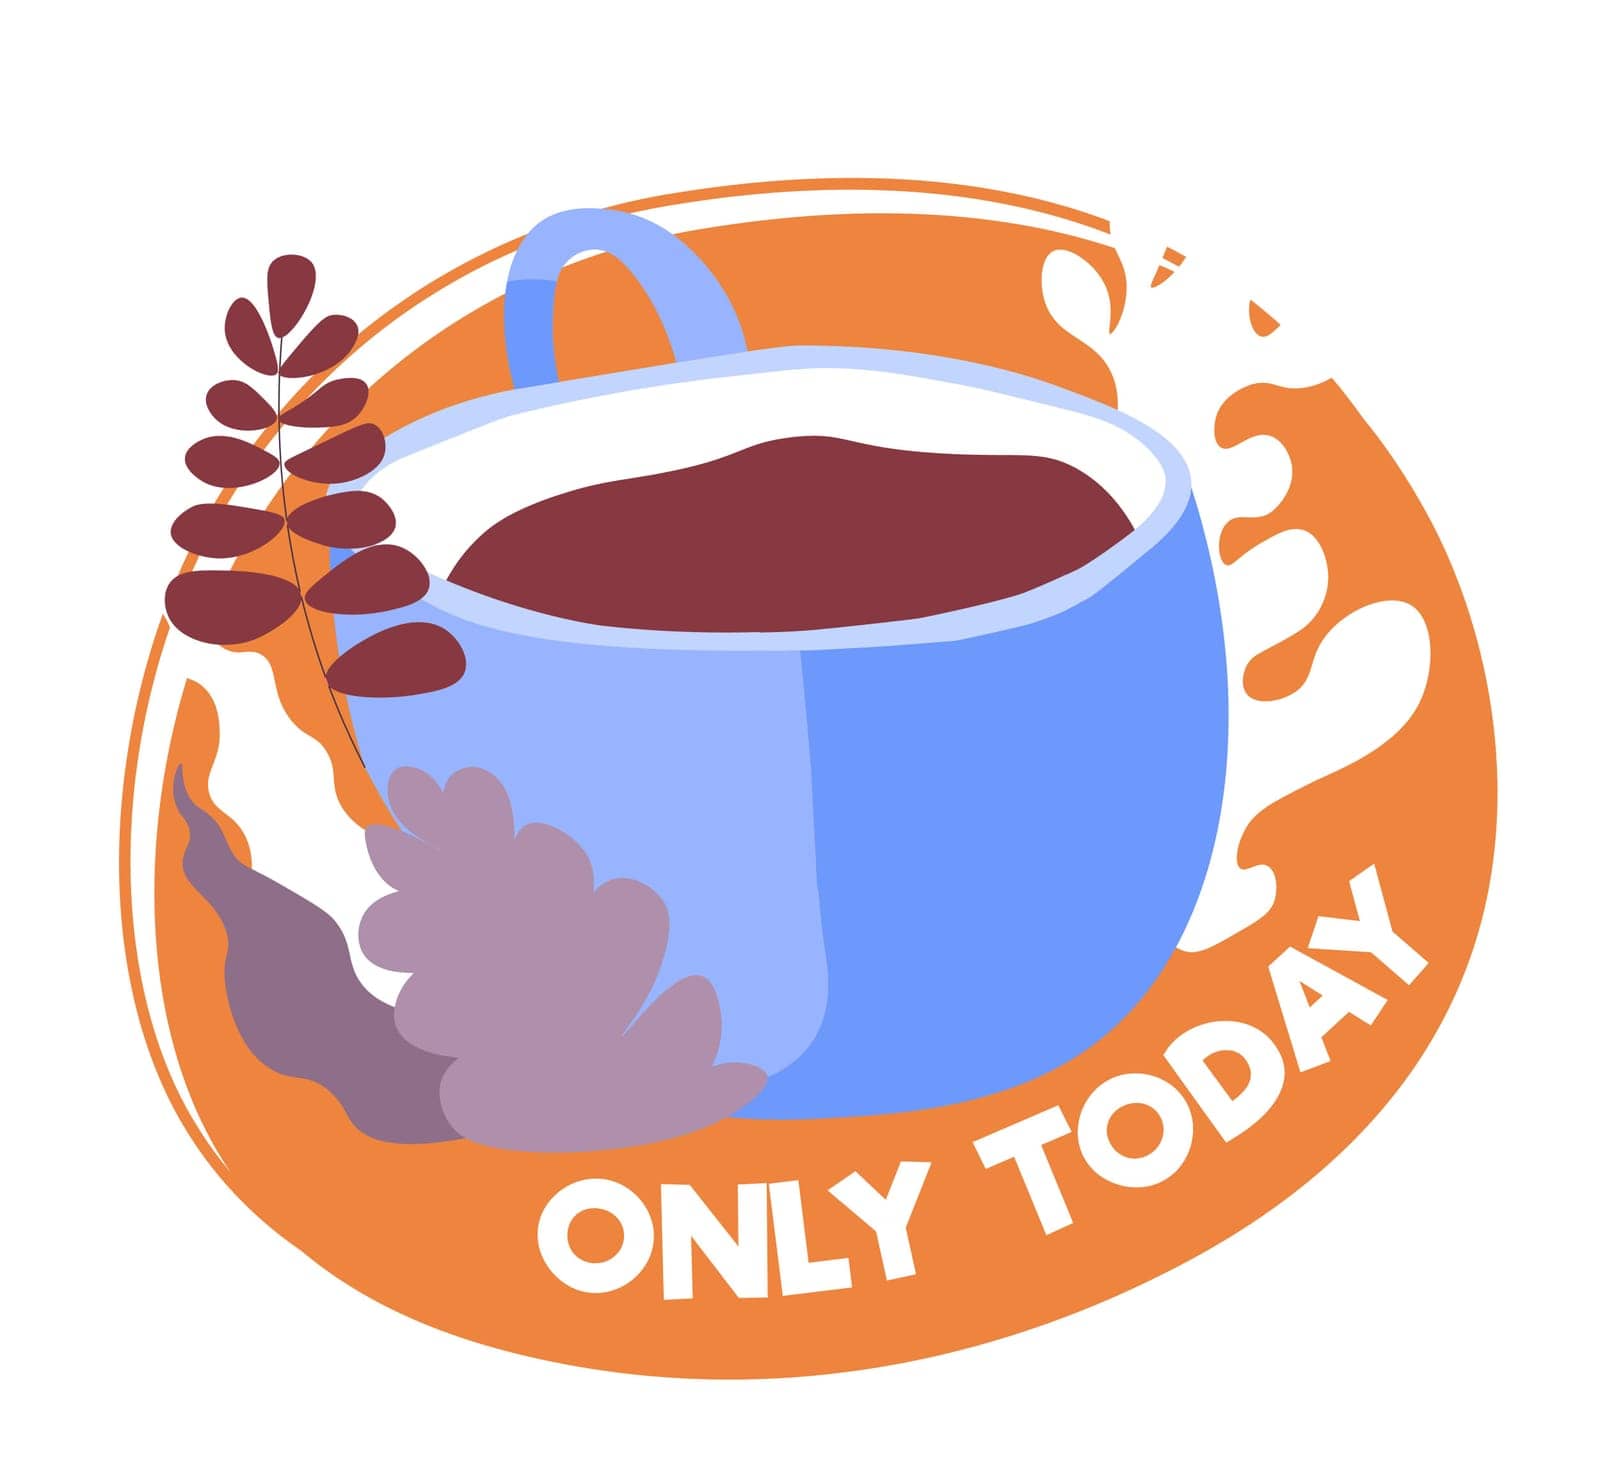 Coffee shop or cafe only today grand sale and discounts on tasty beverages. Isolated cup of drink, breakfast in restaurant or cafe. Americano with leaves on banner with ads. Vector in flat style